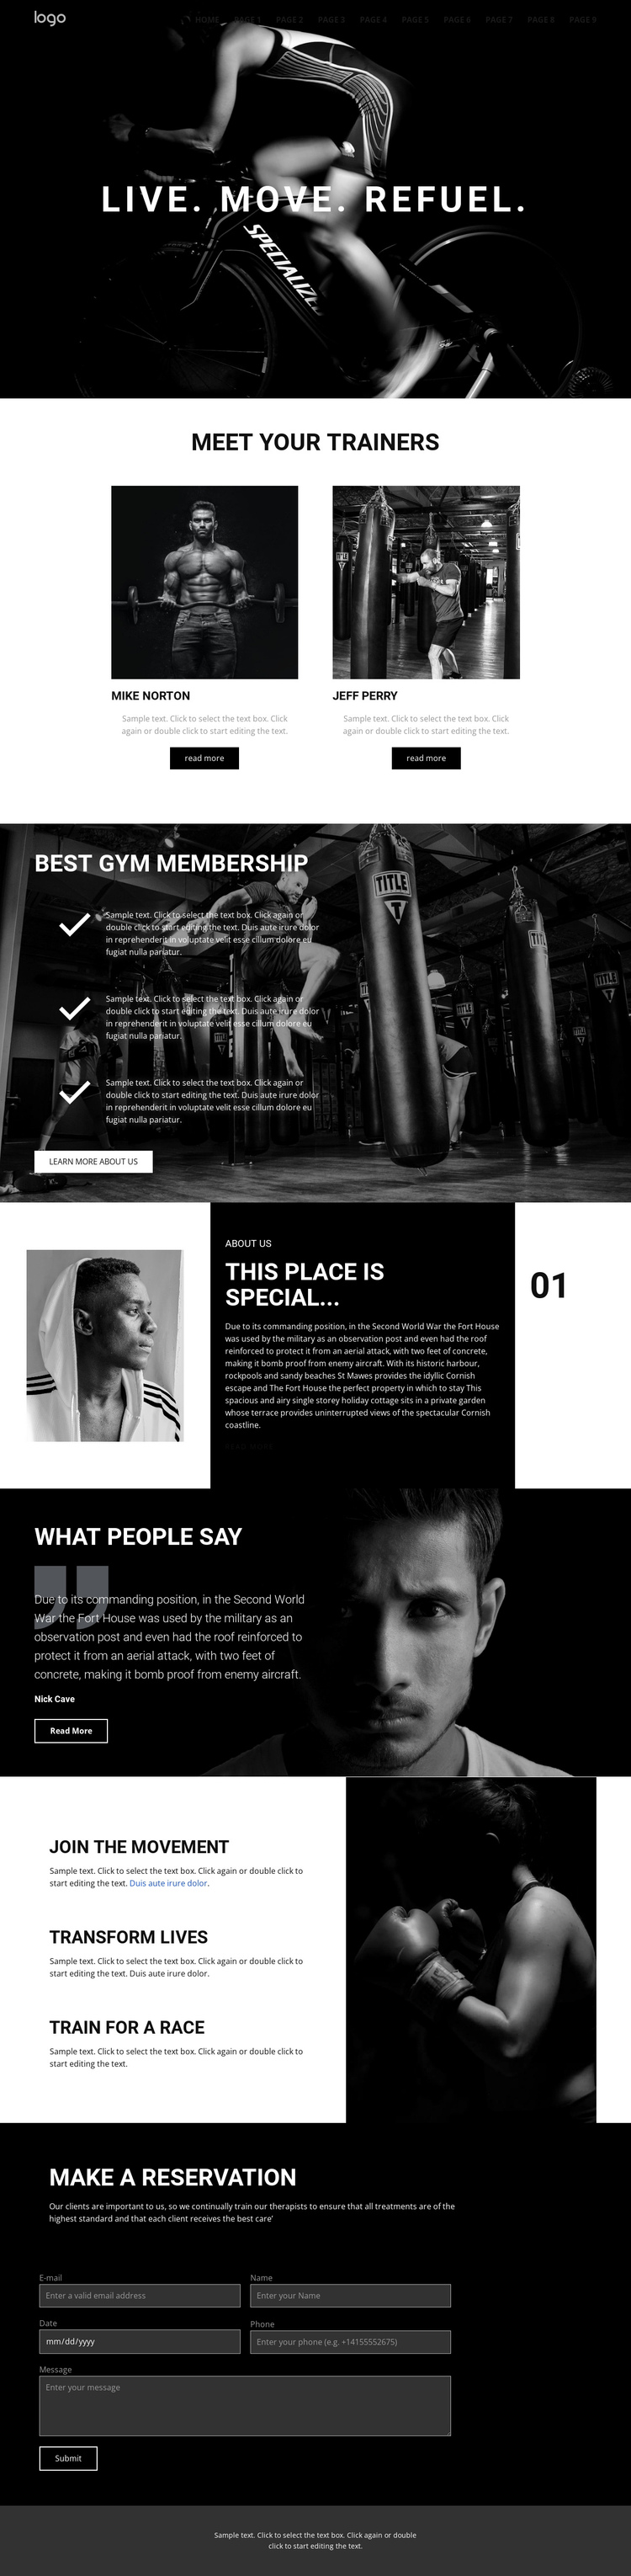 Refuel at power gym One Page Template